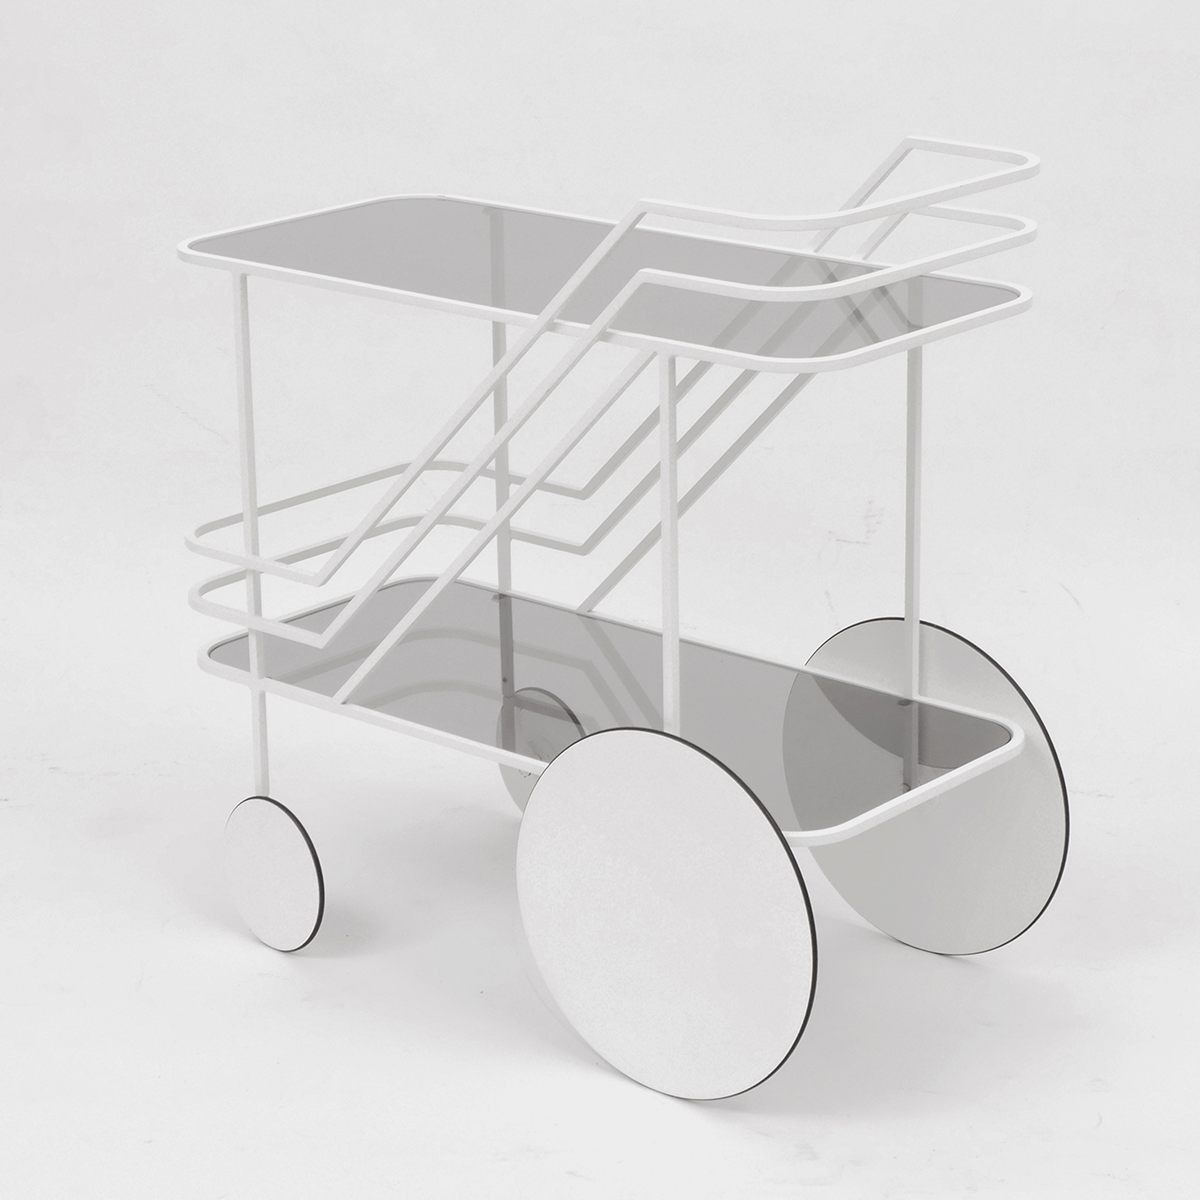 Come As You Are bar cart in white by Christophe de la Fontaine for DANTE - Goods and Bads